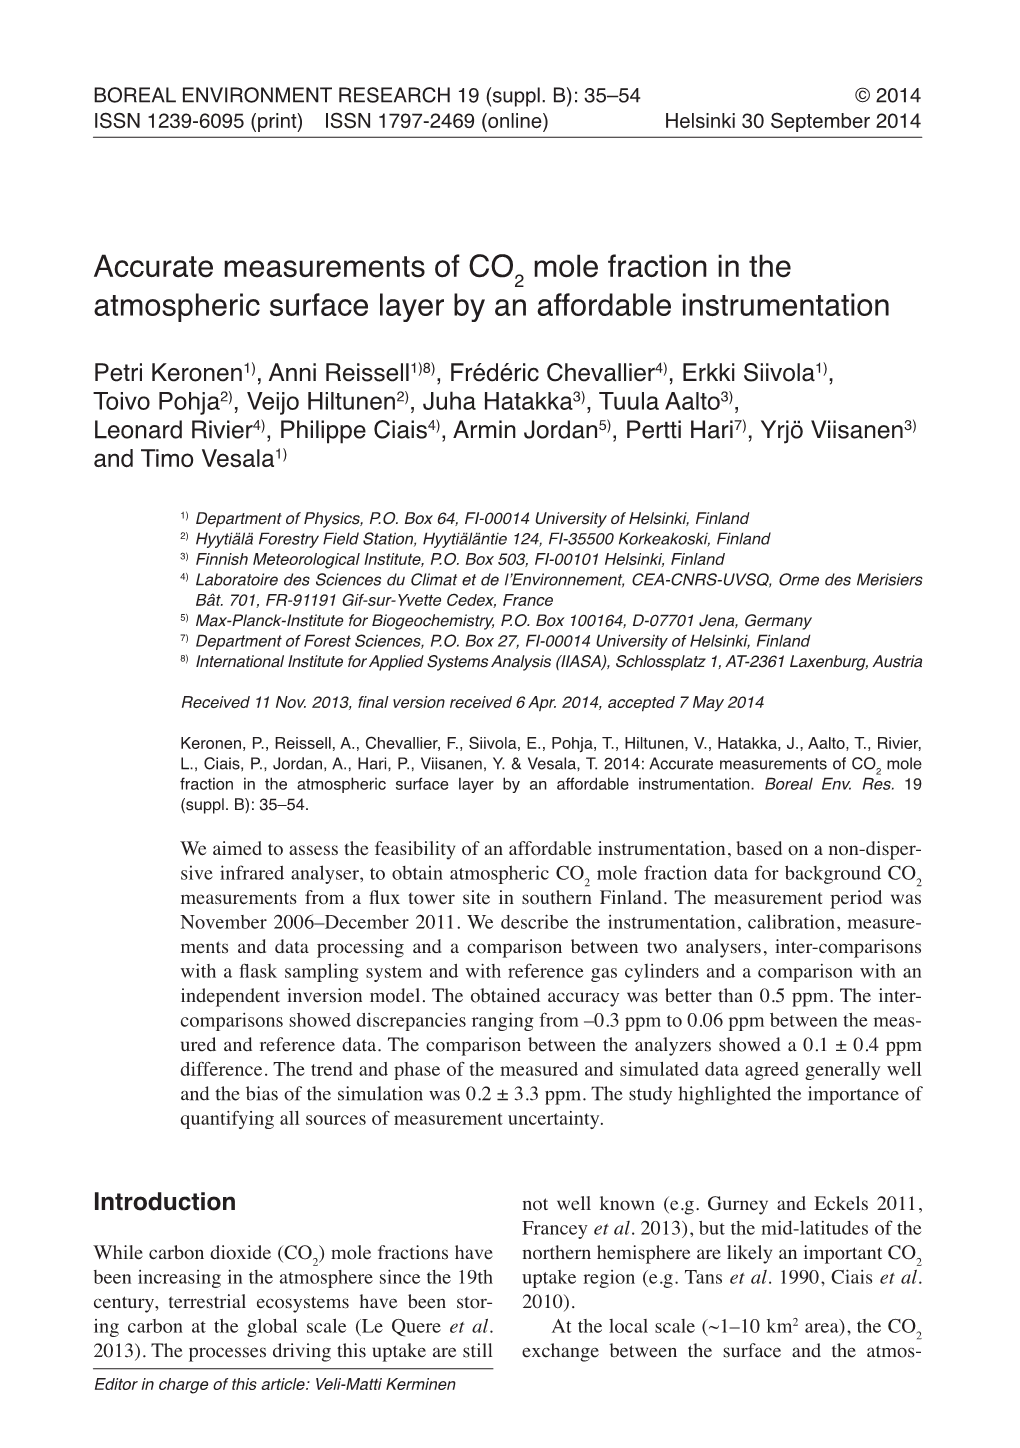 Accurate Measurements of CO2 Mole Fraction in the Atmospheric Surface Layer by an Affordable Instrumentation